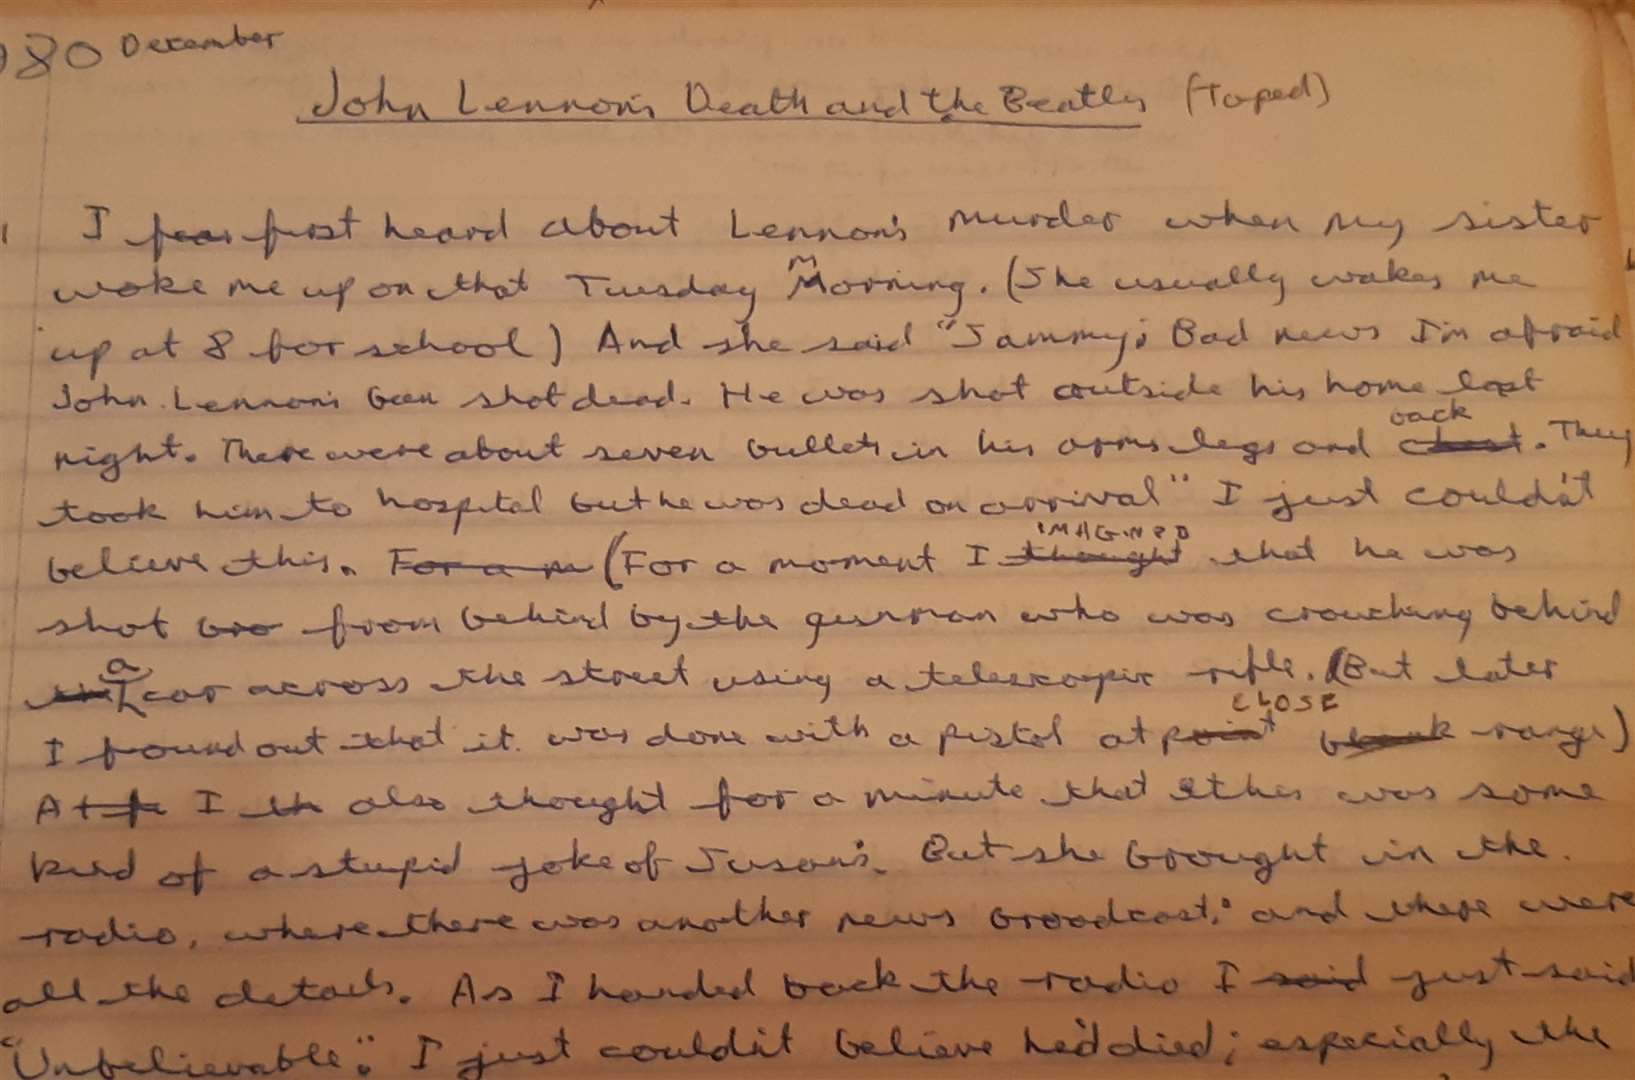 Sam Lennon's journal in the murder aftermath, January 1981